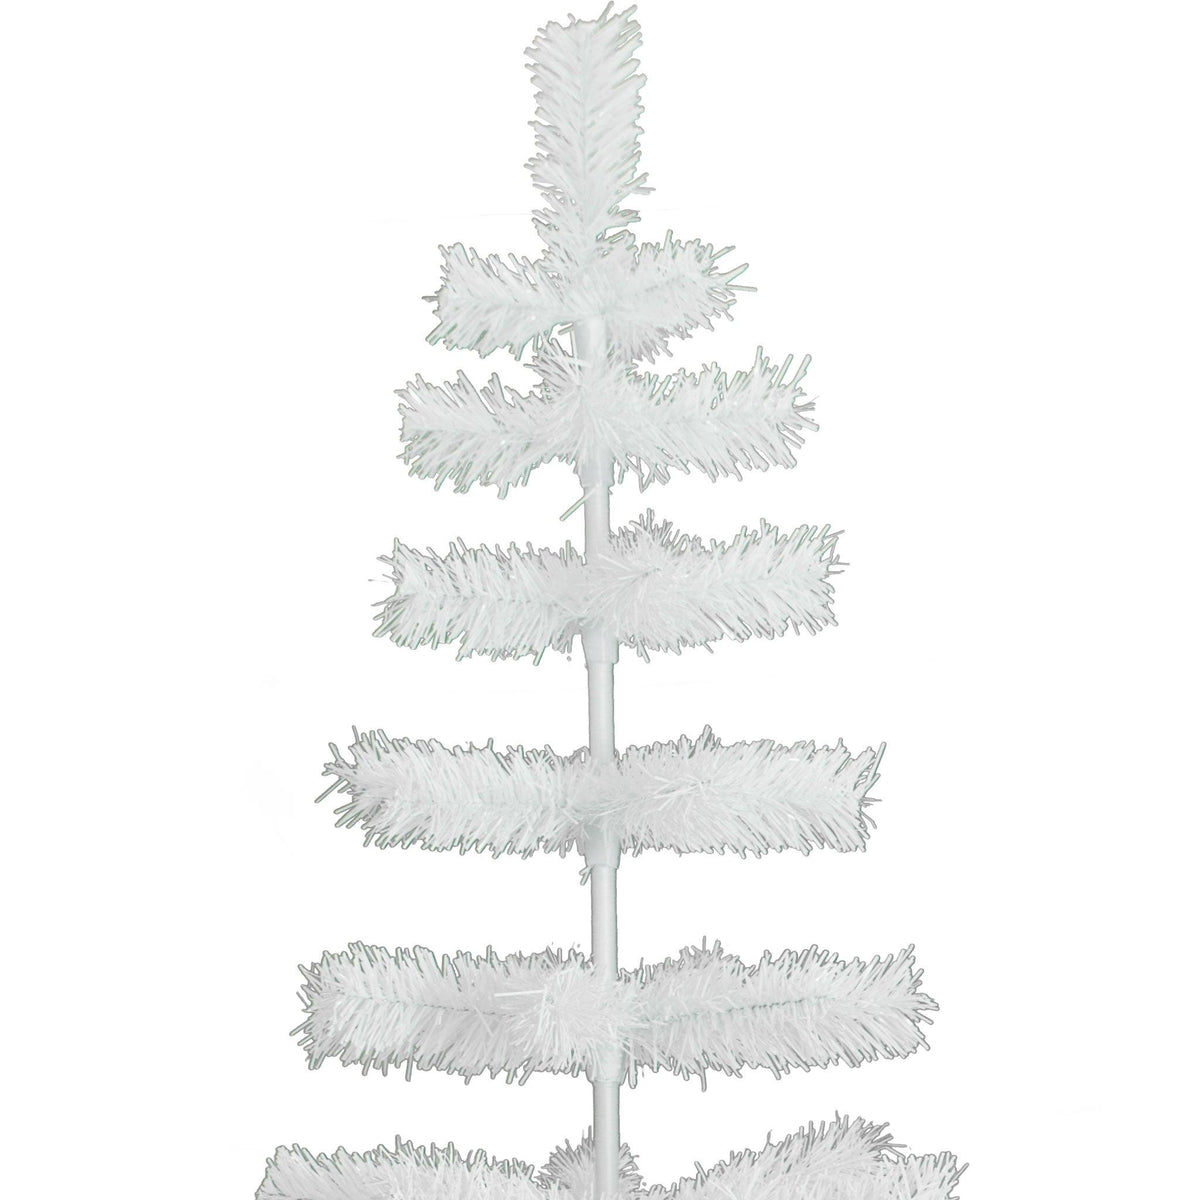 Top of the 4FT White Tinsel Tree.  Lee Display's 4ft White Tinsel Christmas Tree on sale now at leedisplay.com